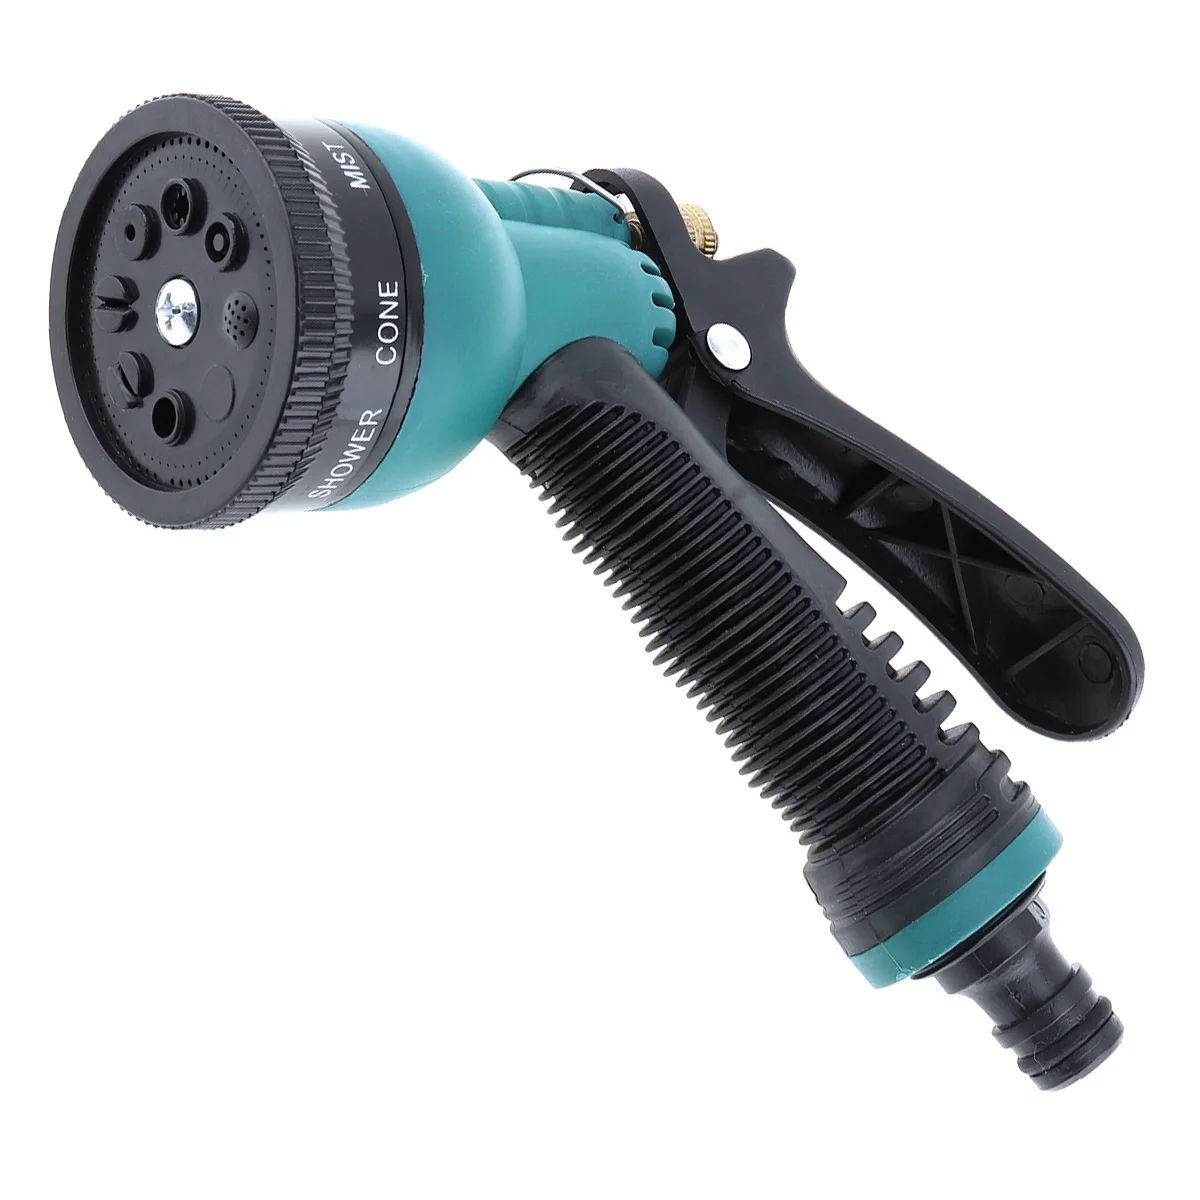 Multifunction High Pressure 7 Pattern Nozzle Water Gun with Telescopic Pipe for Vehicle Cleaning / Gardening Watering reciprocating saw handsaw saber saw multifunction saw 900w 1050w for metal wood meat bone pipe cutting saw with blade kit